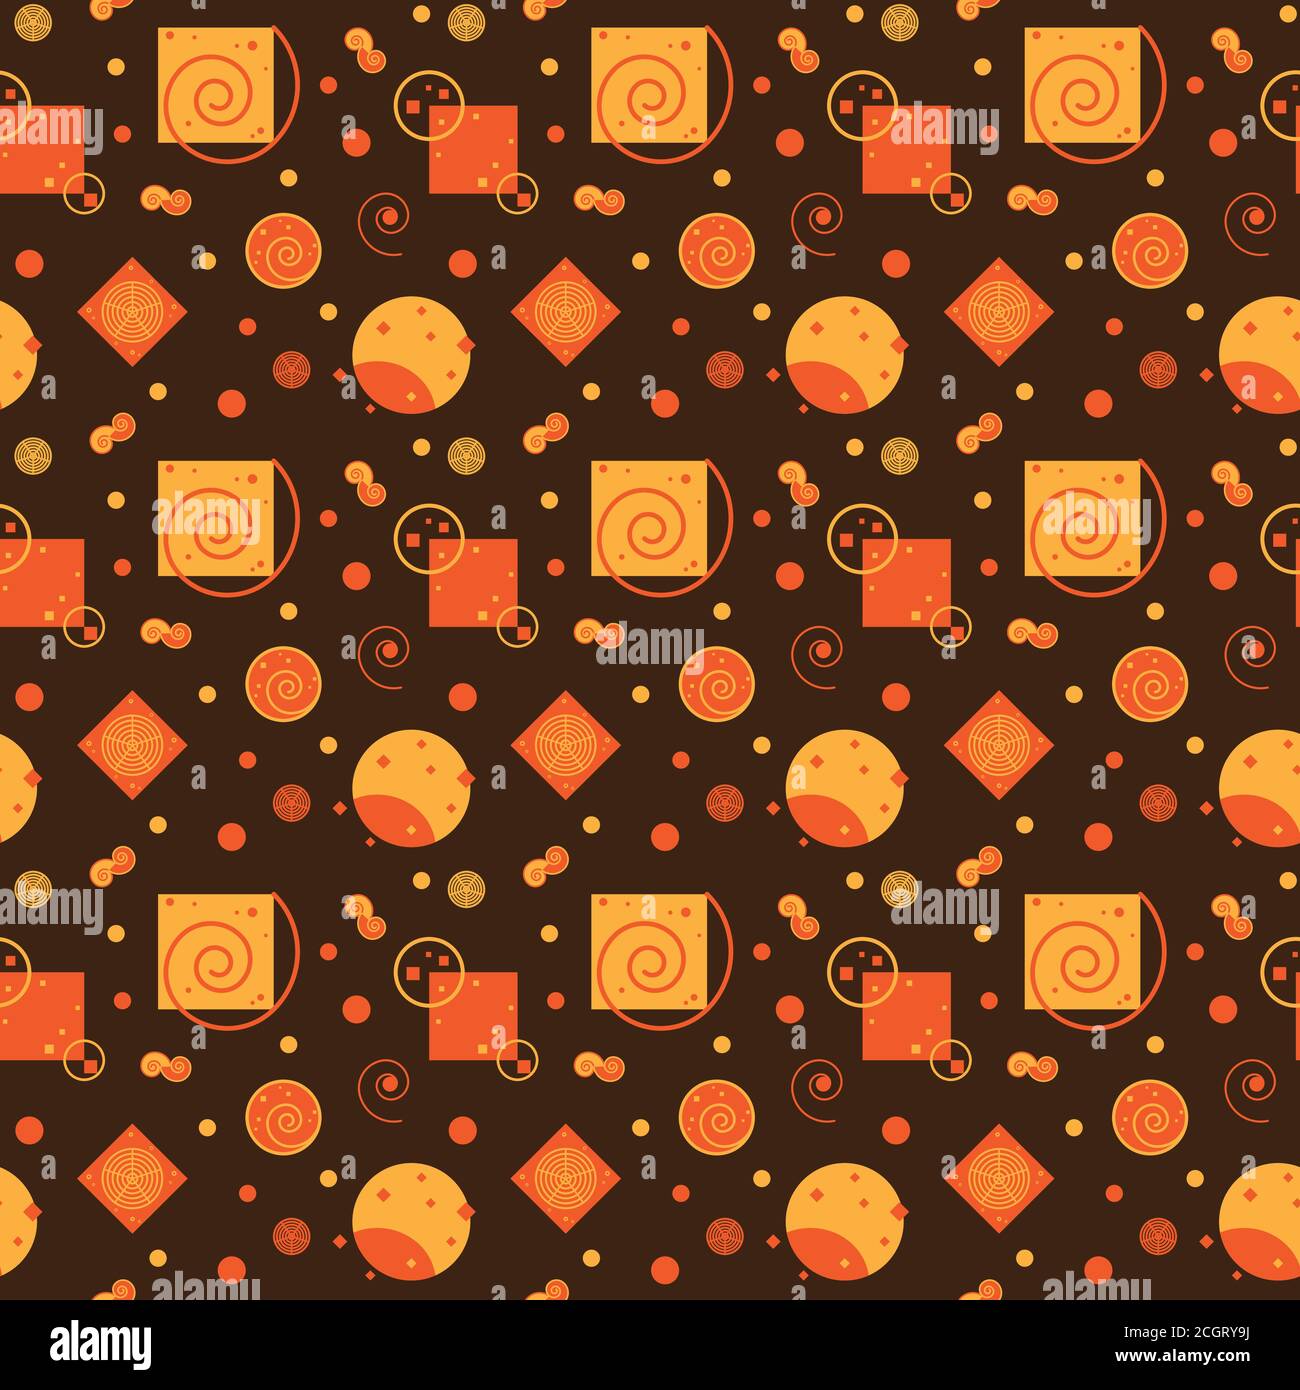 Seamless pattern, geometry shapes in warm tone Stock Vector